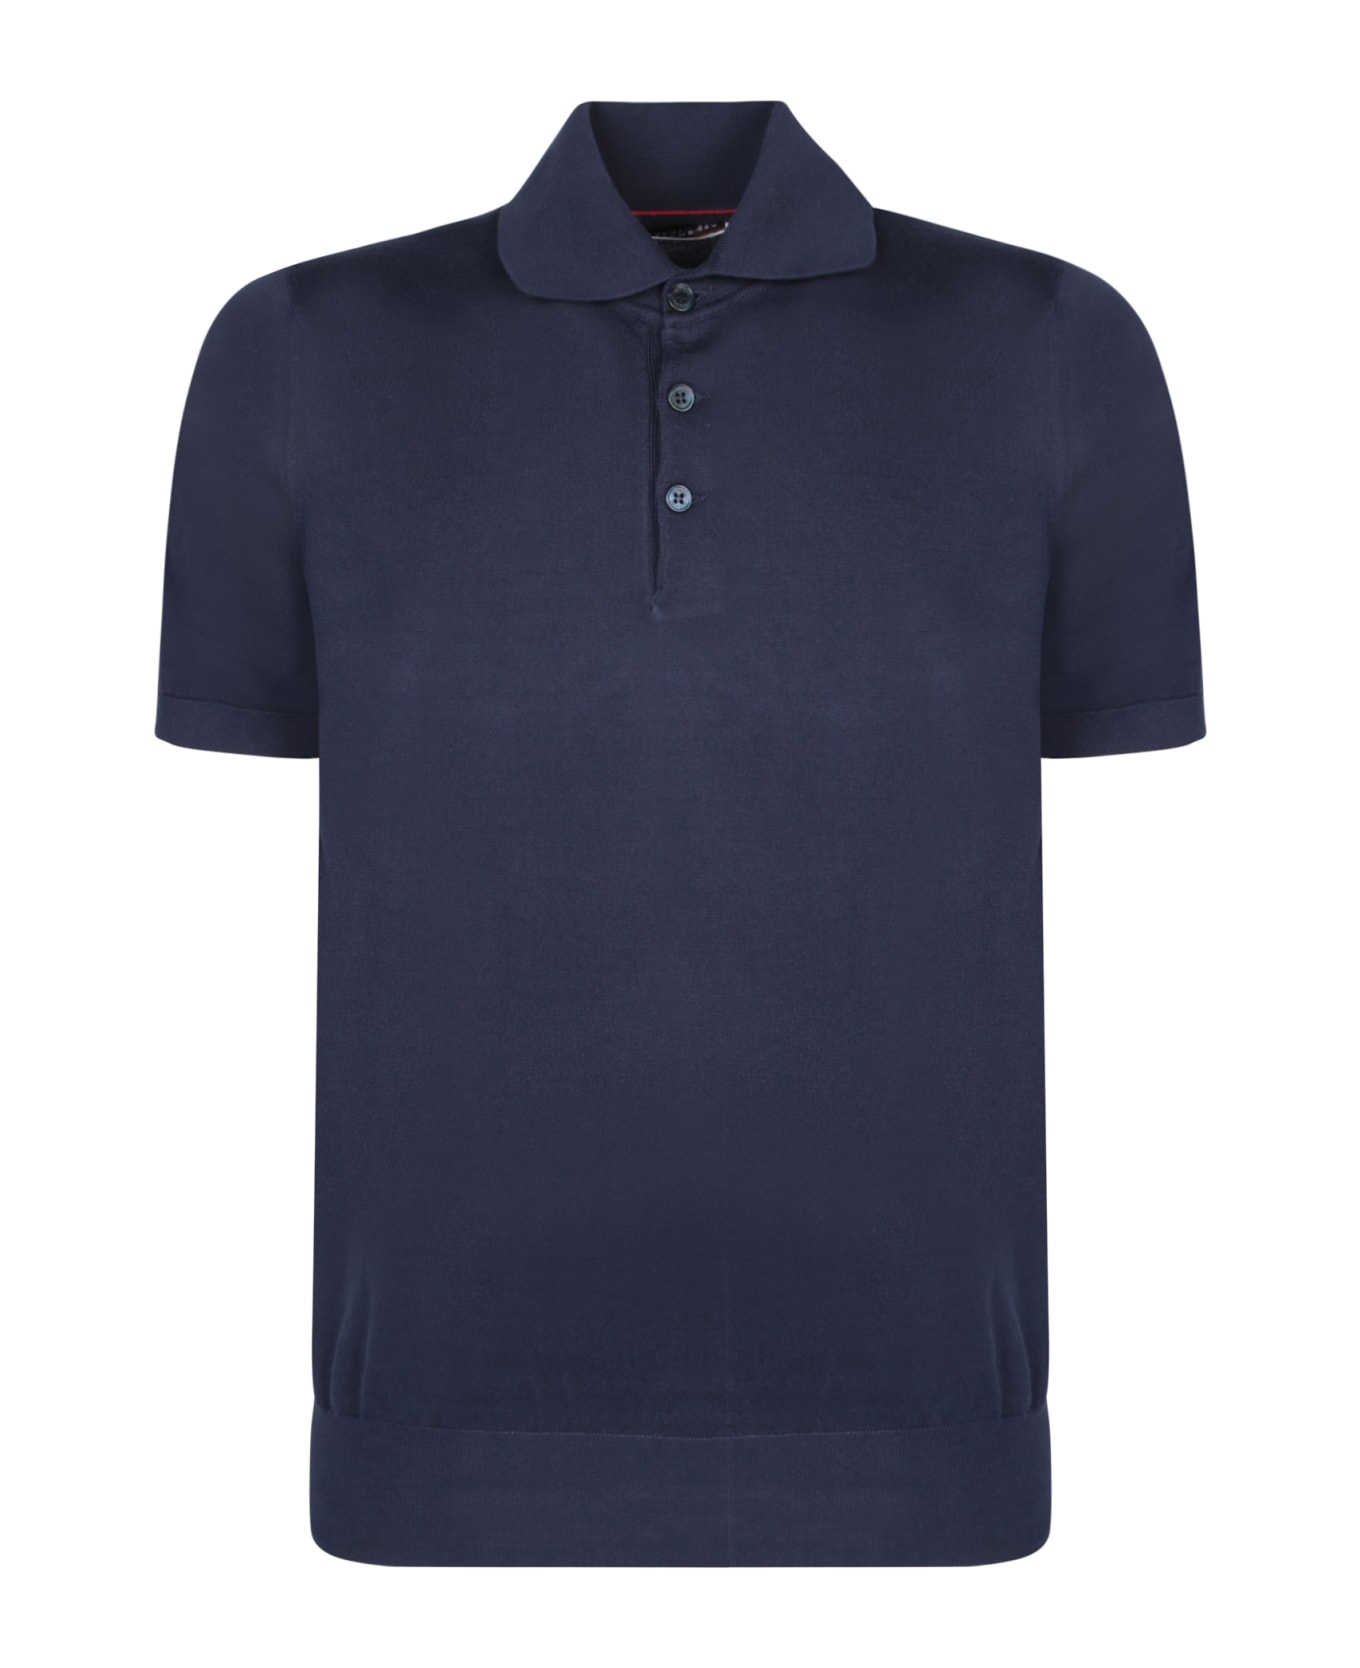 Brunello Cucinelli Short Sleeves Blue Polo Shirt - Navy ポロシャツ